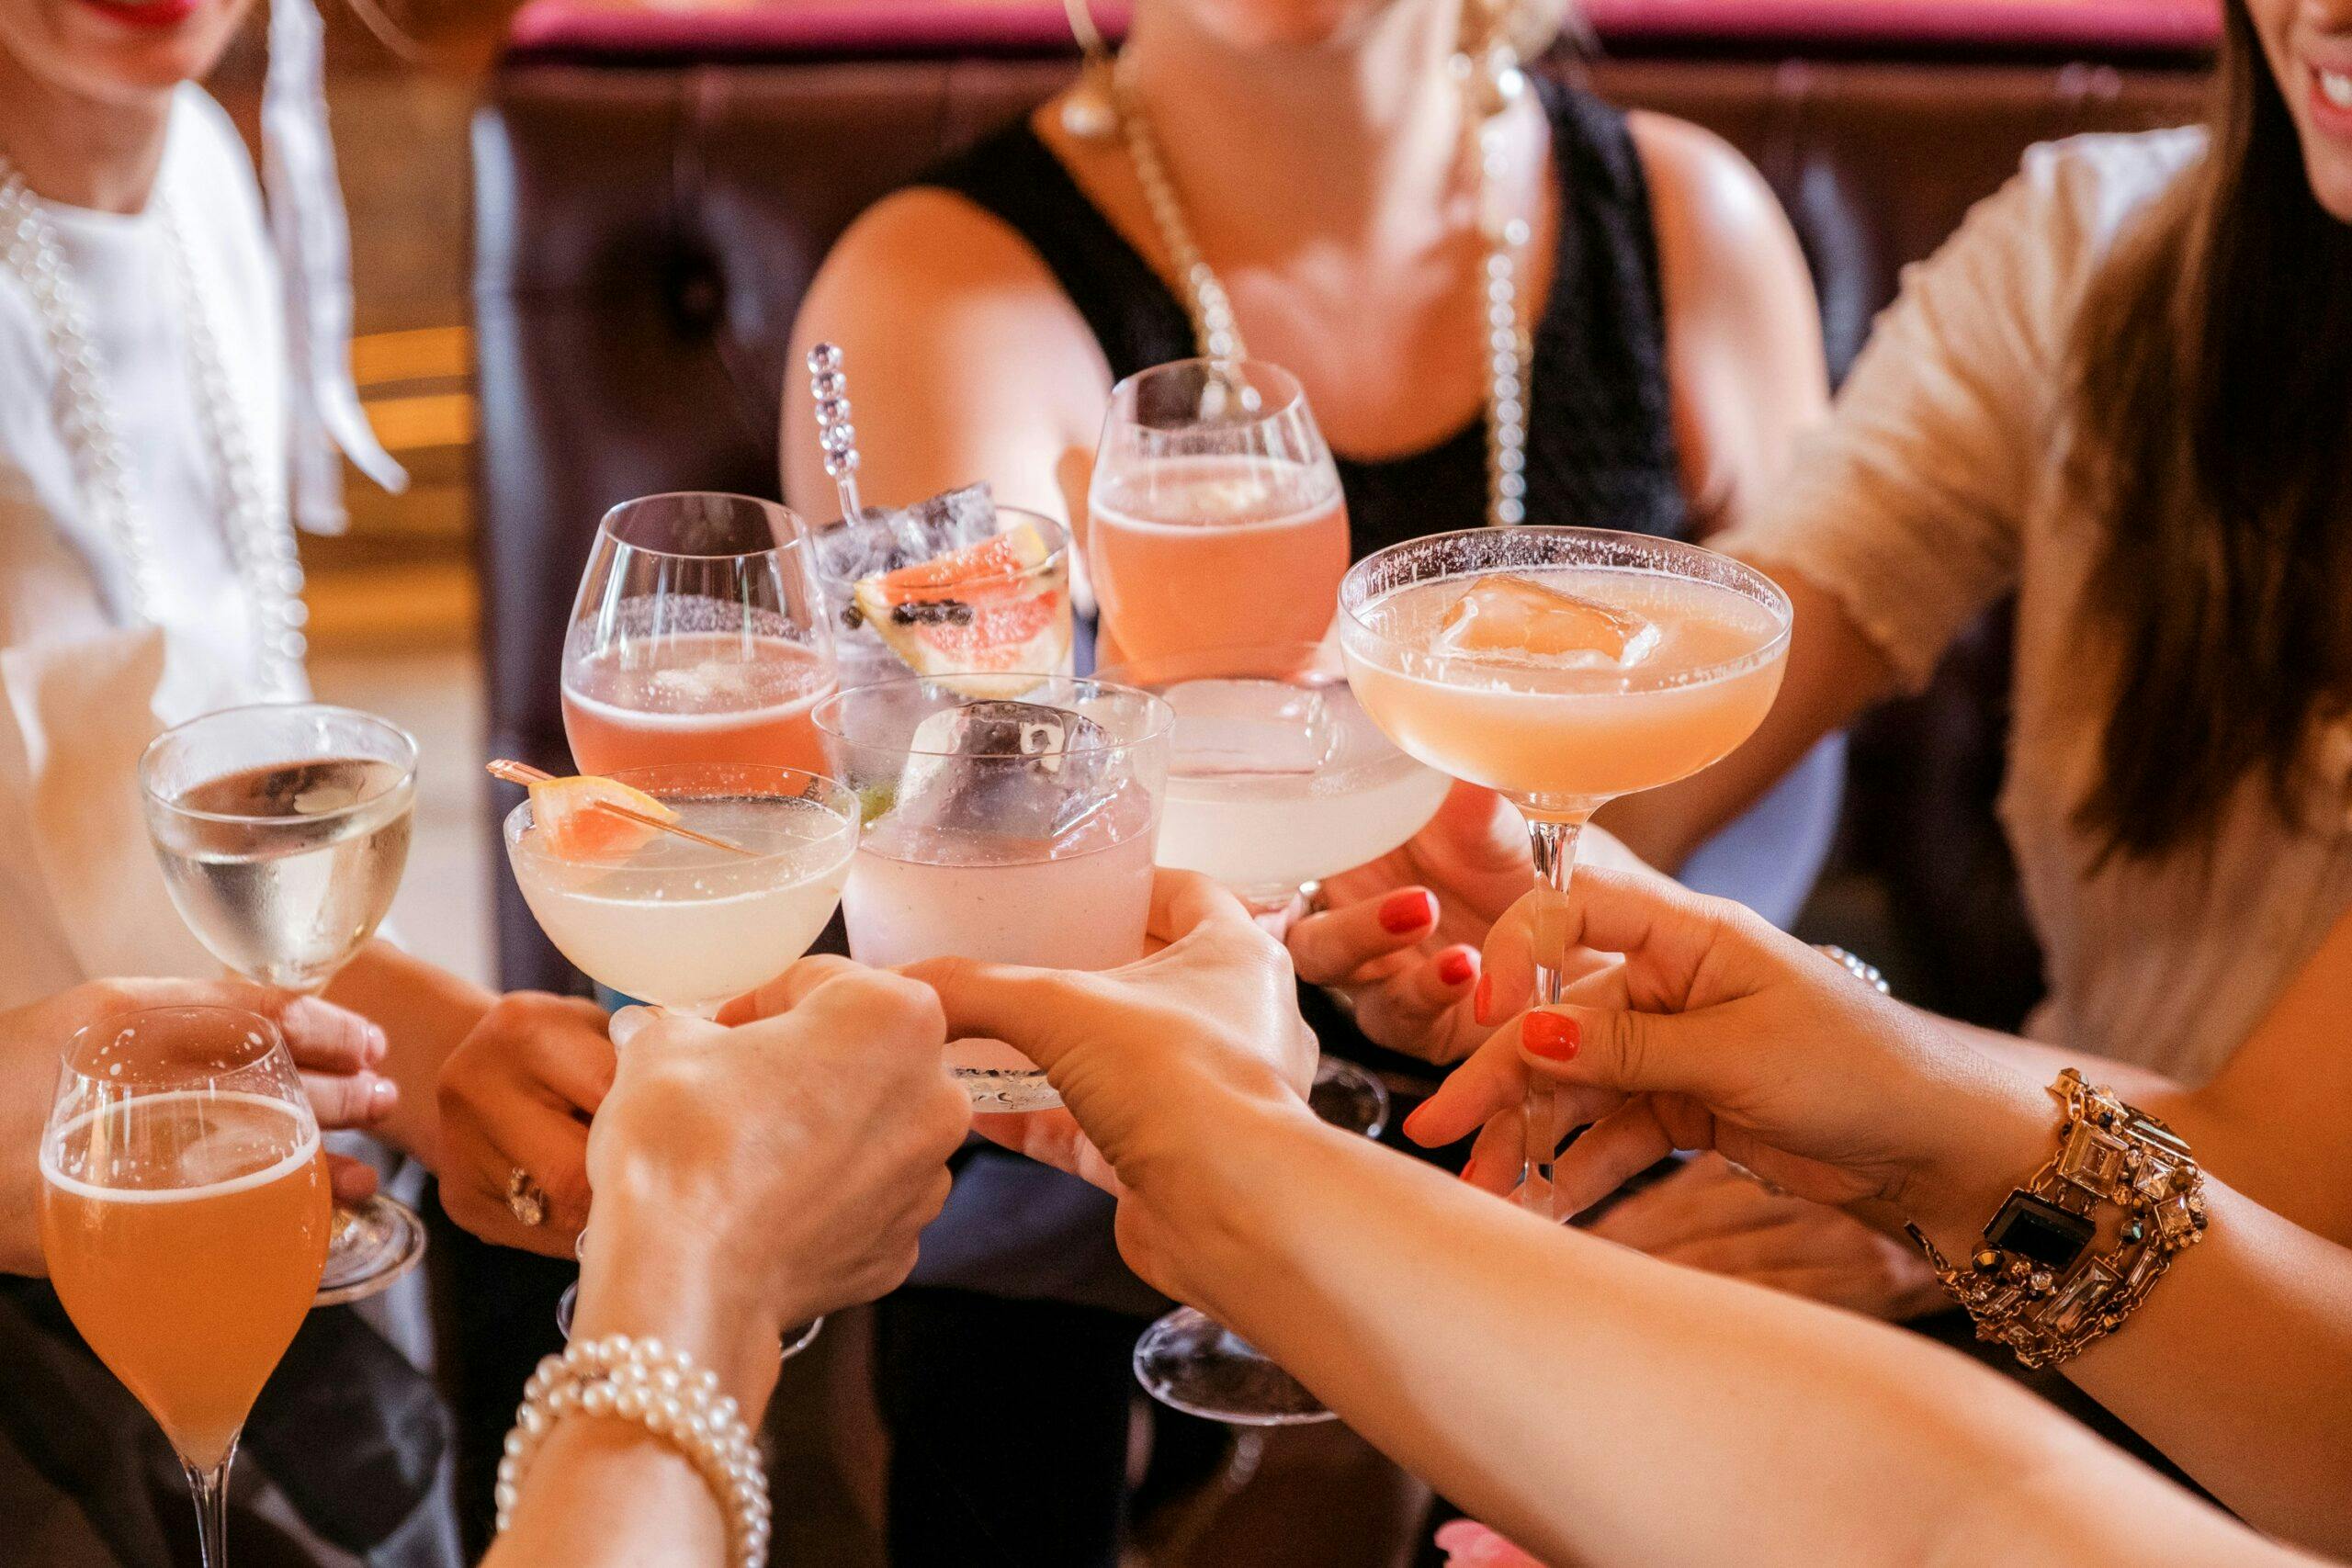 An image of a group of women clinking together various drinks.